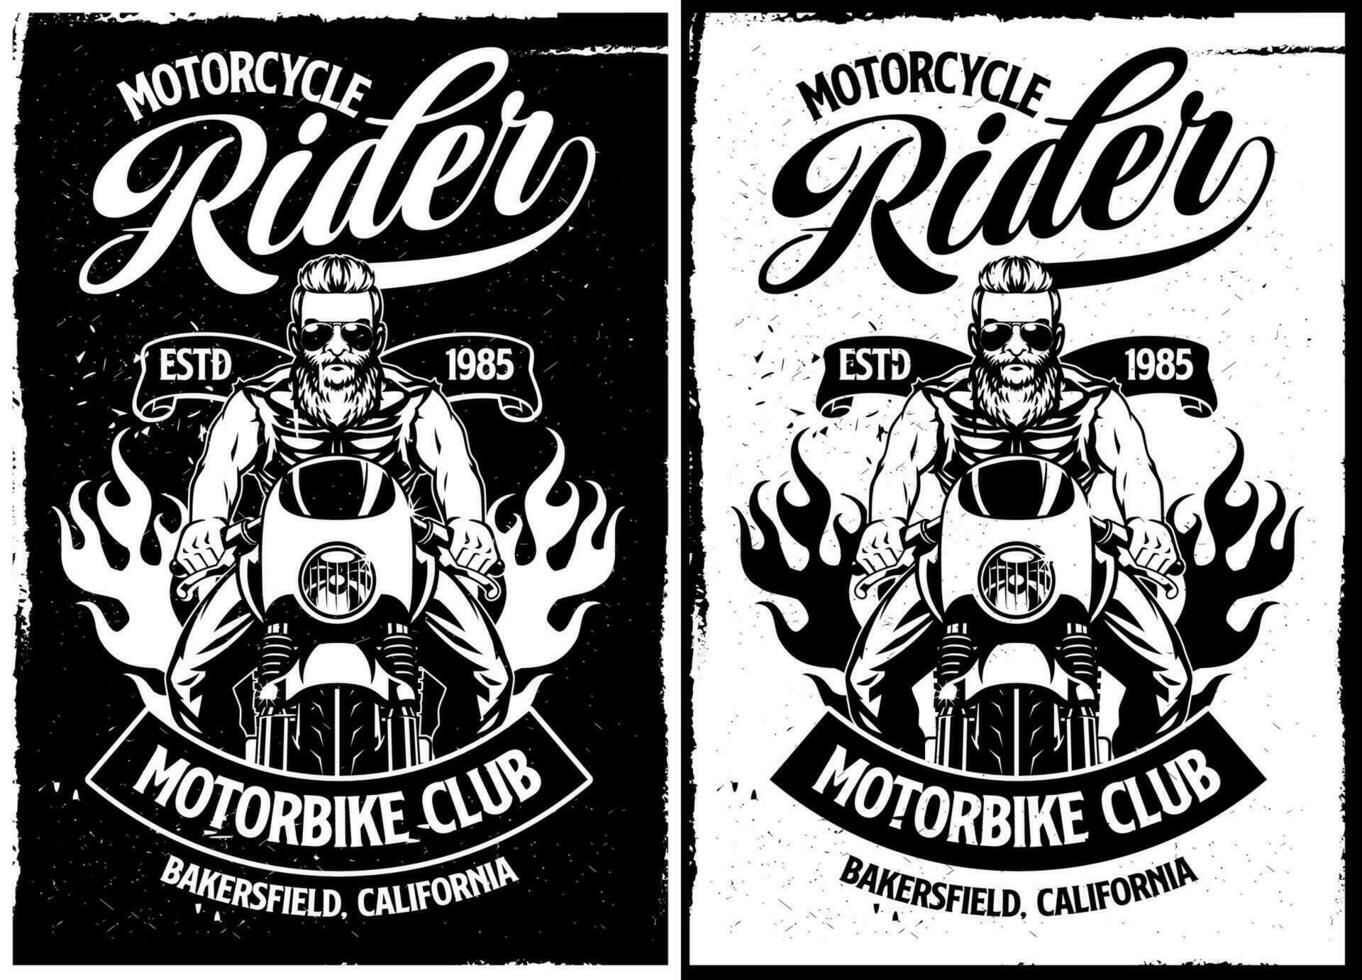 Black and white T-shirt design of motorcycle rider in textured vector